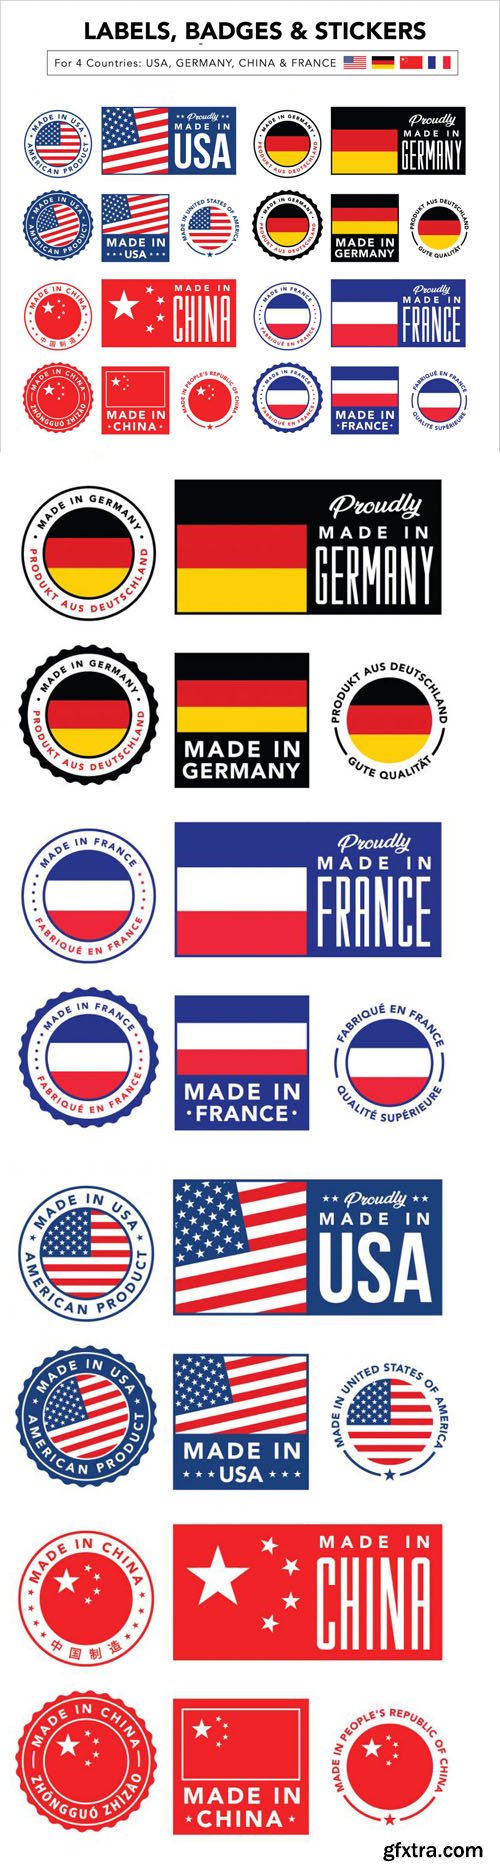 Made in USA, Germany, China & France Labels, Badges & Stickers in Vector